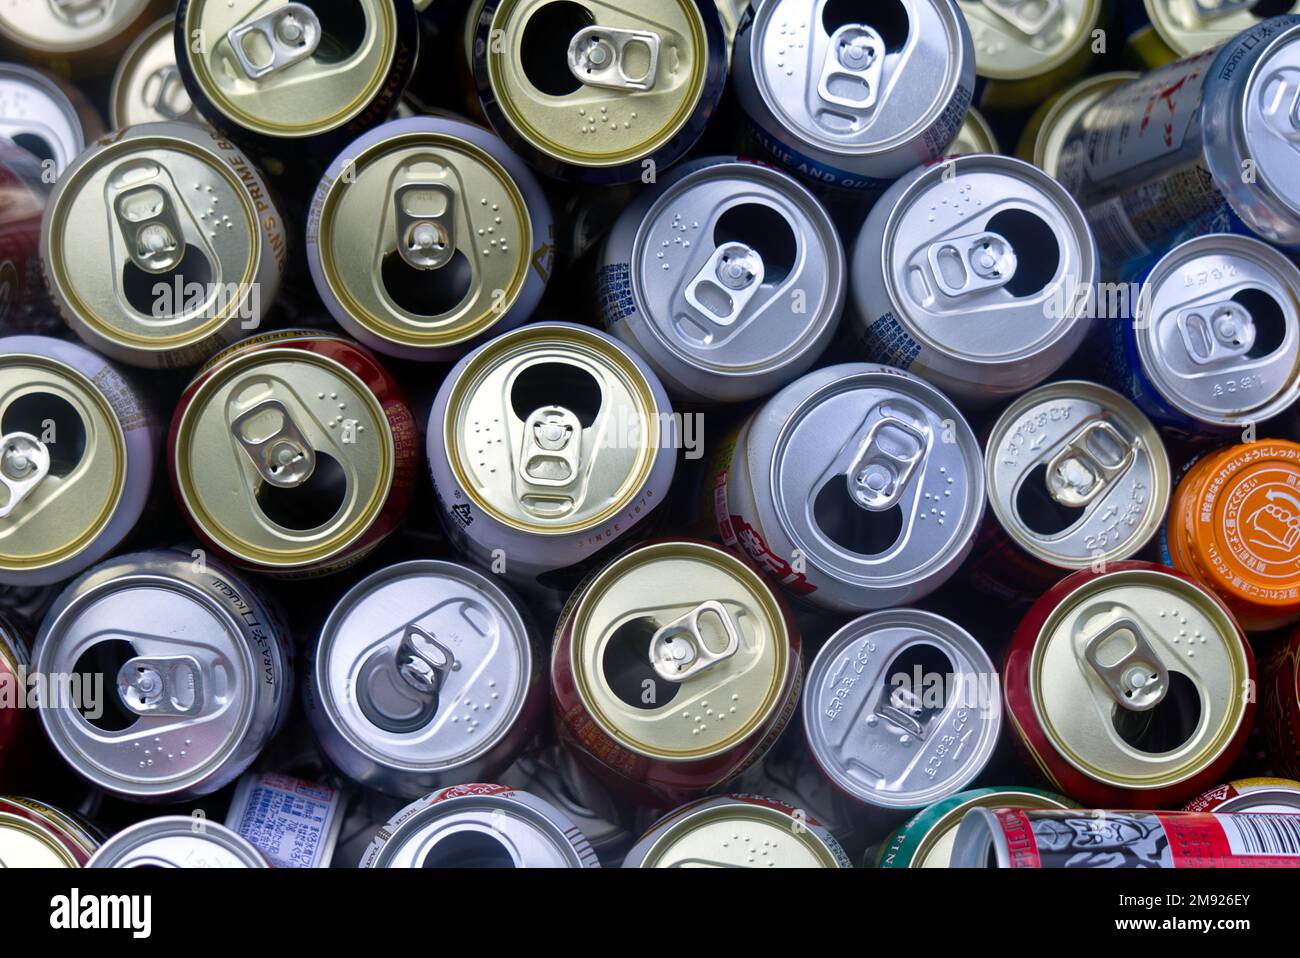 A lot of open cans Stock Photo